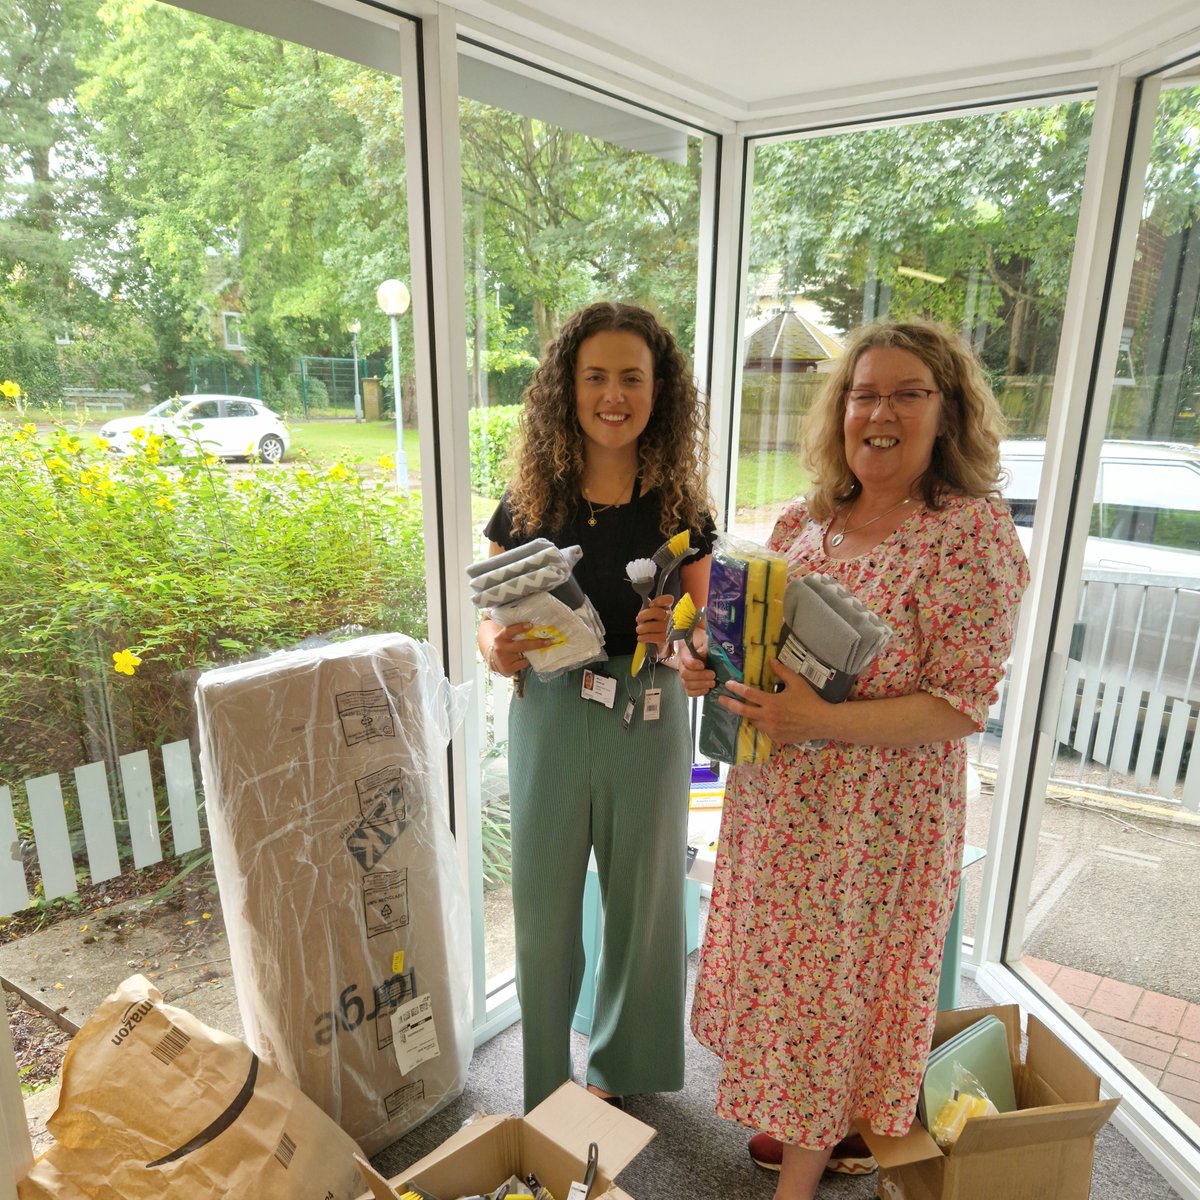 Care leaver new home pack given to Emily to help her set up home. We're working hard with Liss and Molly from Children's Services to put more together for care leavers going to Uni